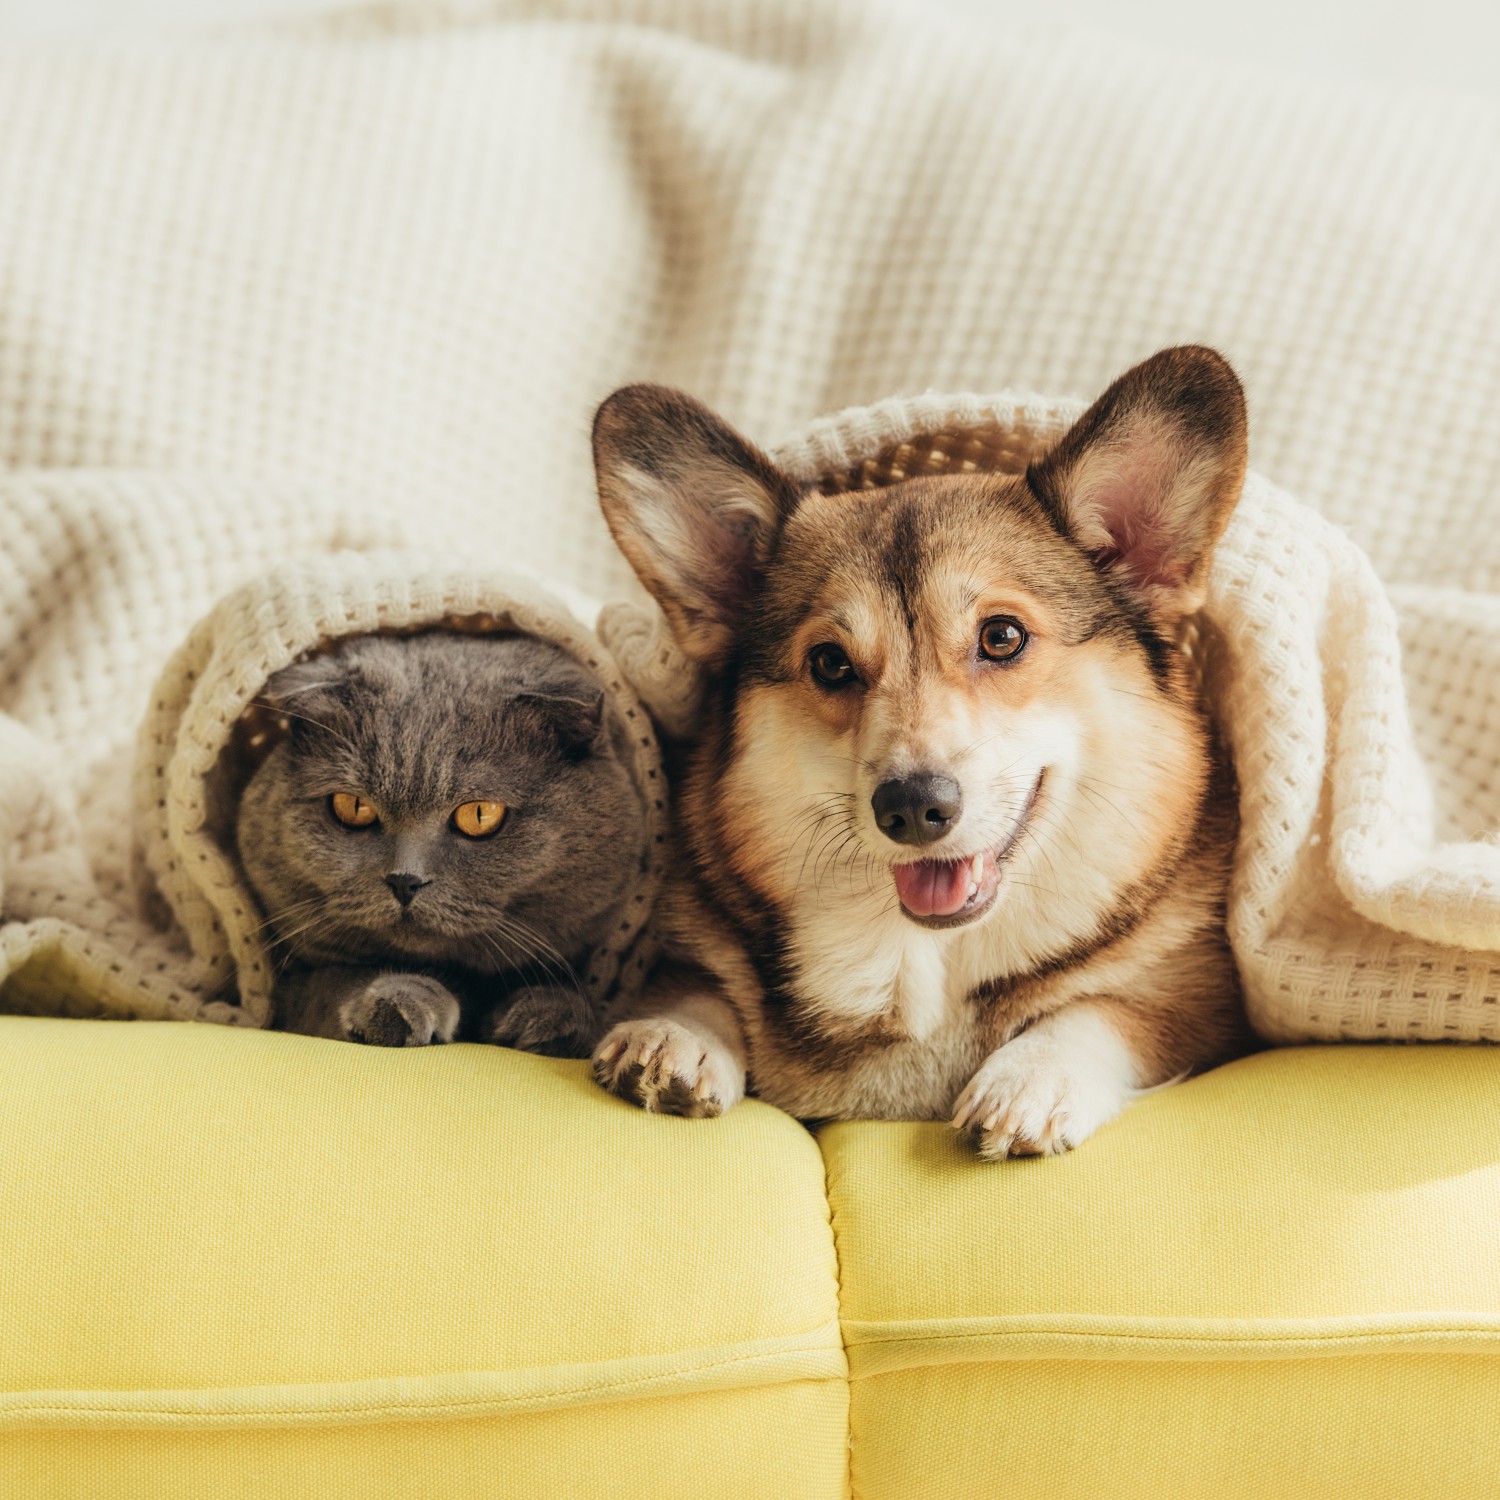 Cat and dog in blanket